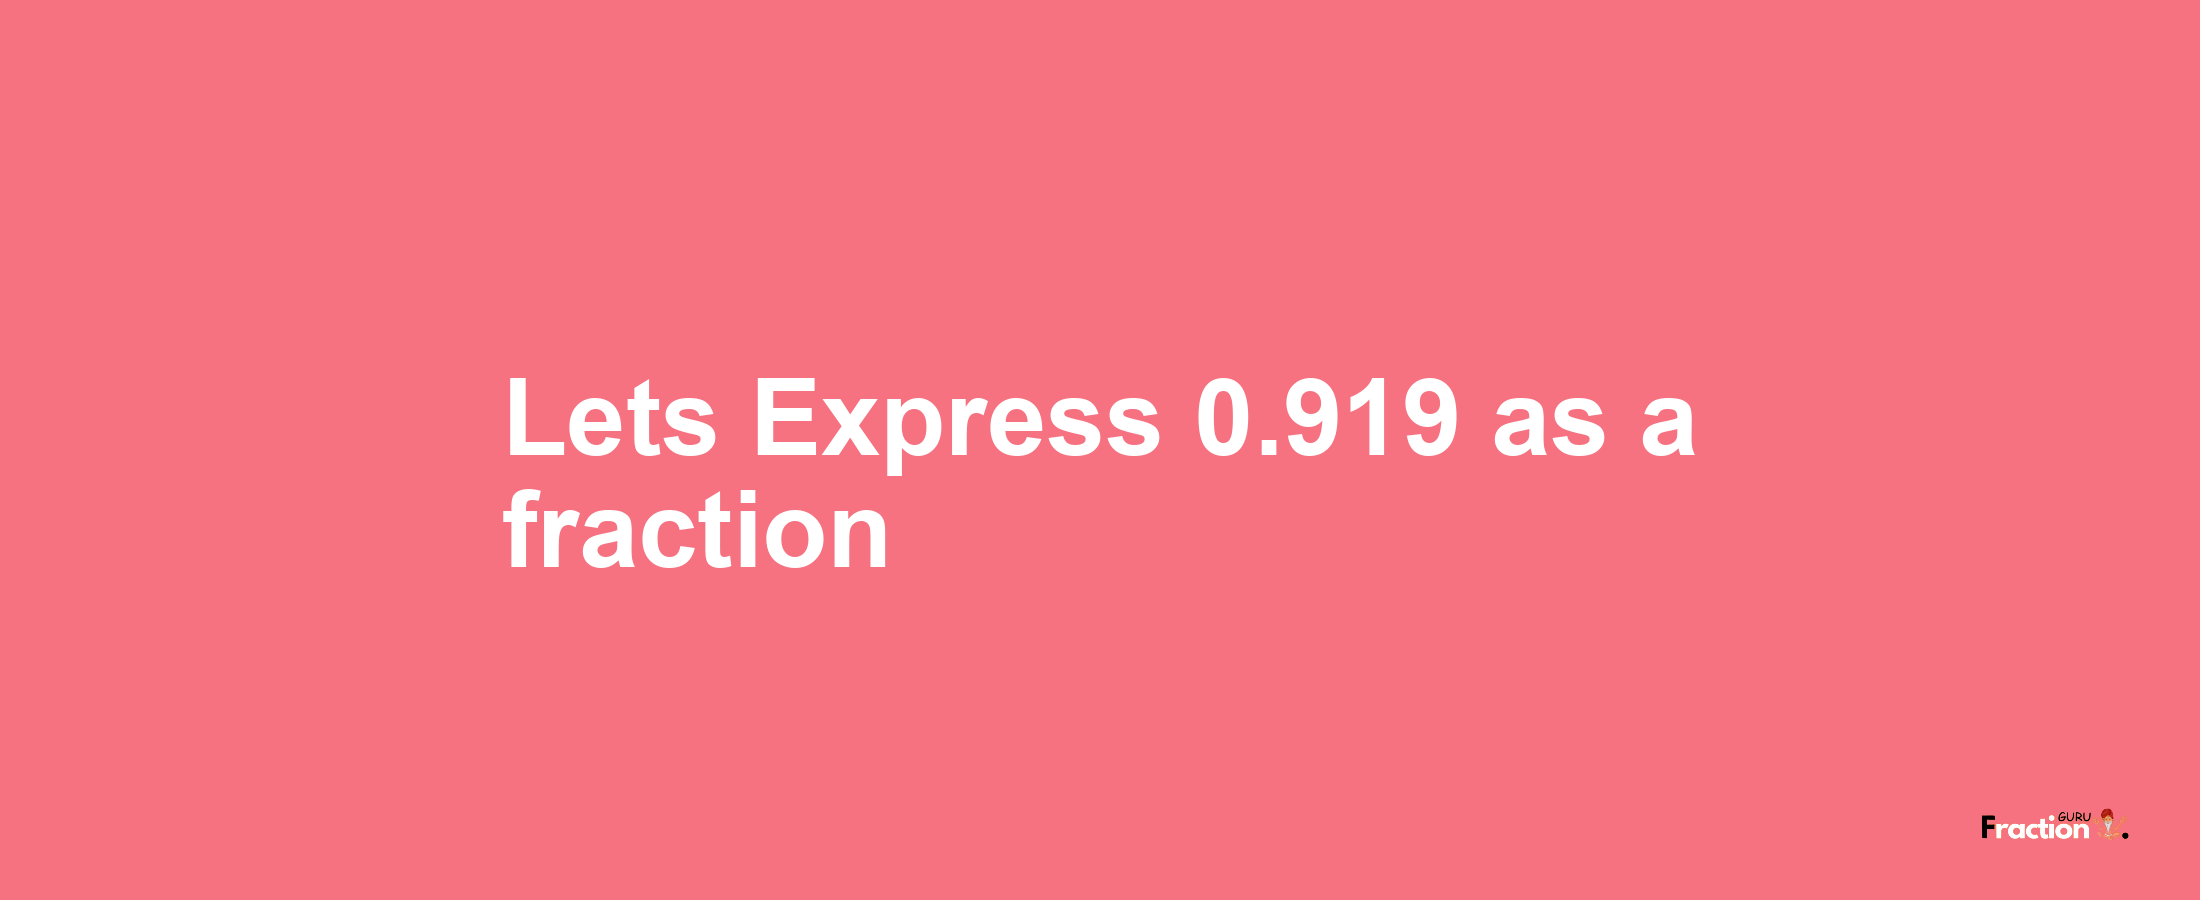 Lets Express 0.919 as afraction